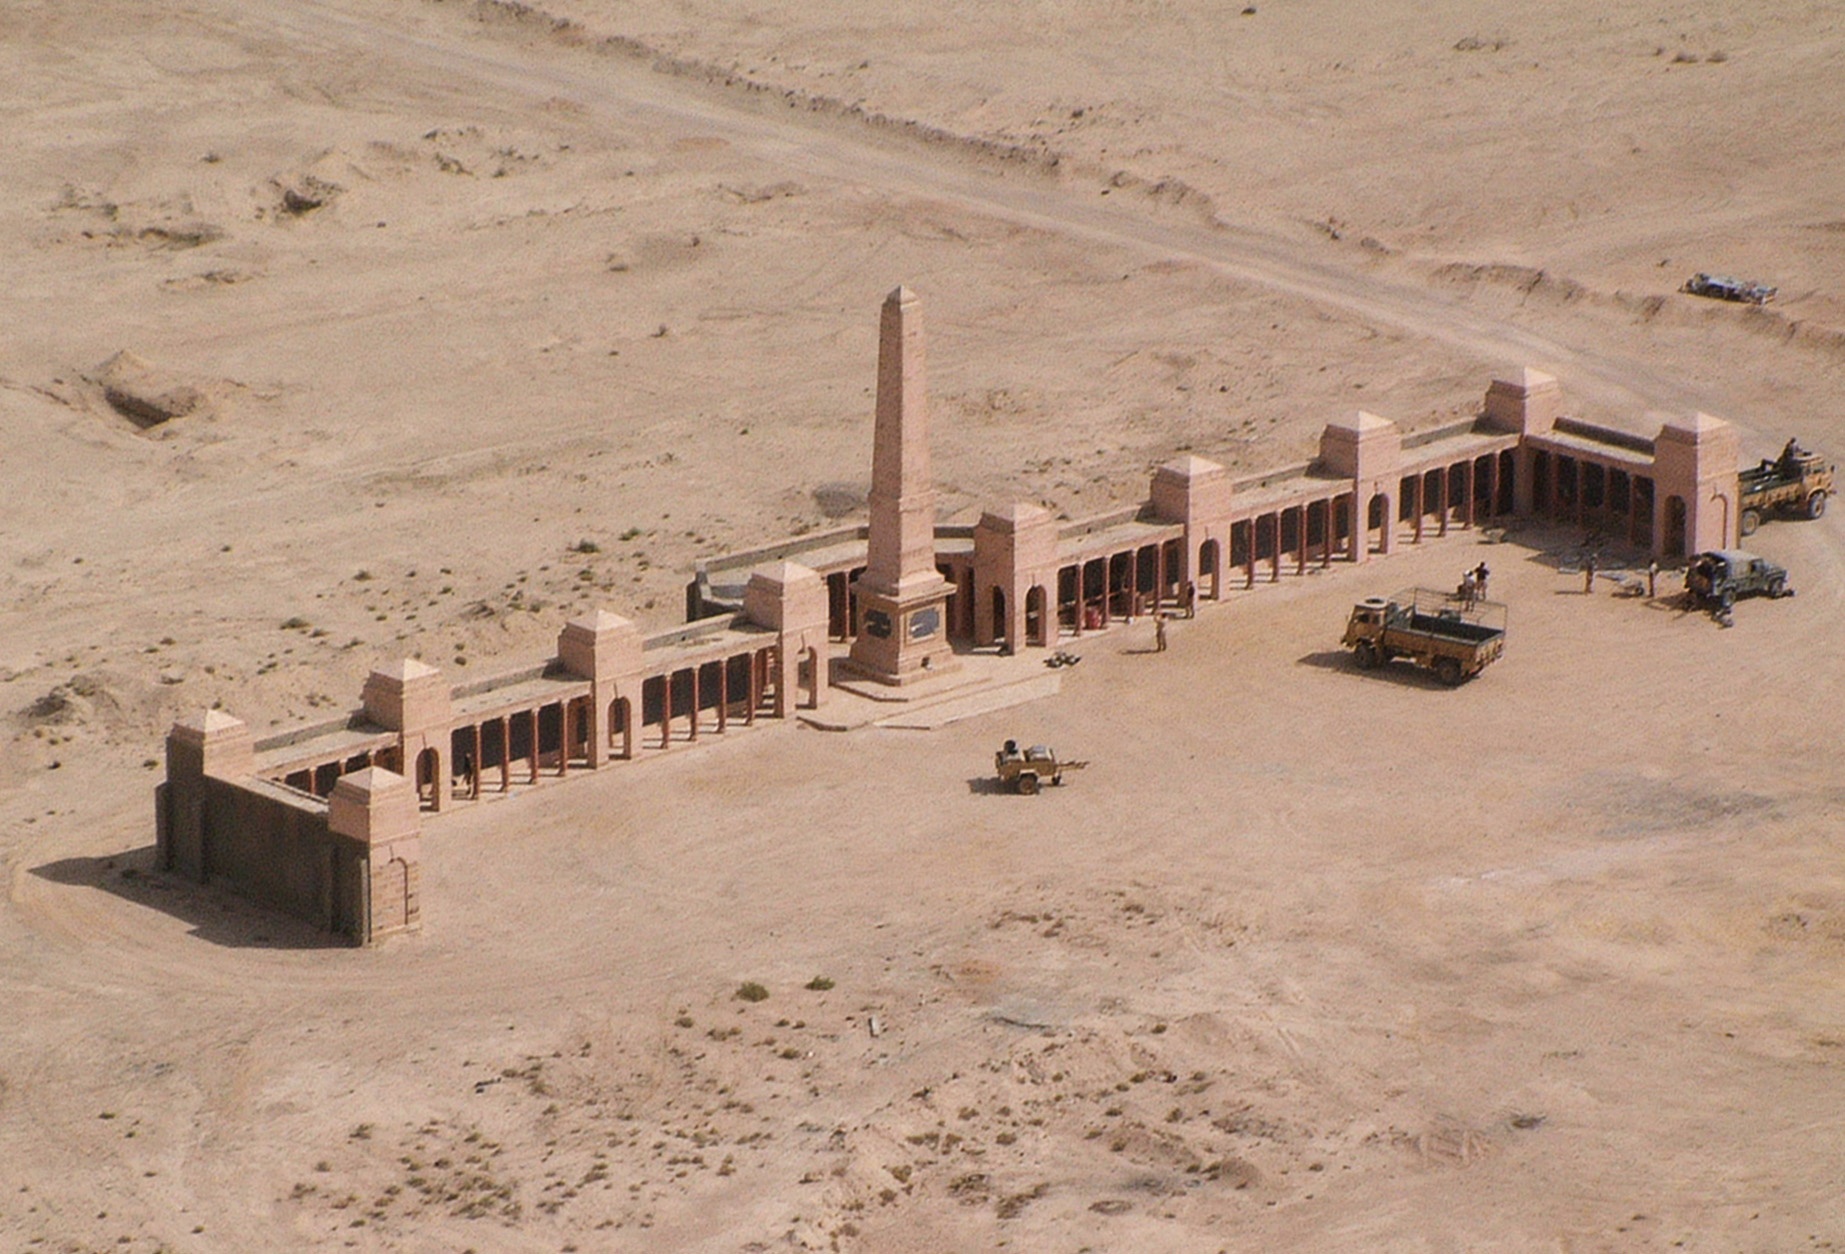 Photo of Basra Military Cemetery. Sand ground with  a long wall memorial with 11 towers. The central tower is the tallest. 3 military vehicles and a trailer are in front,